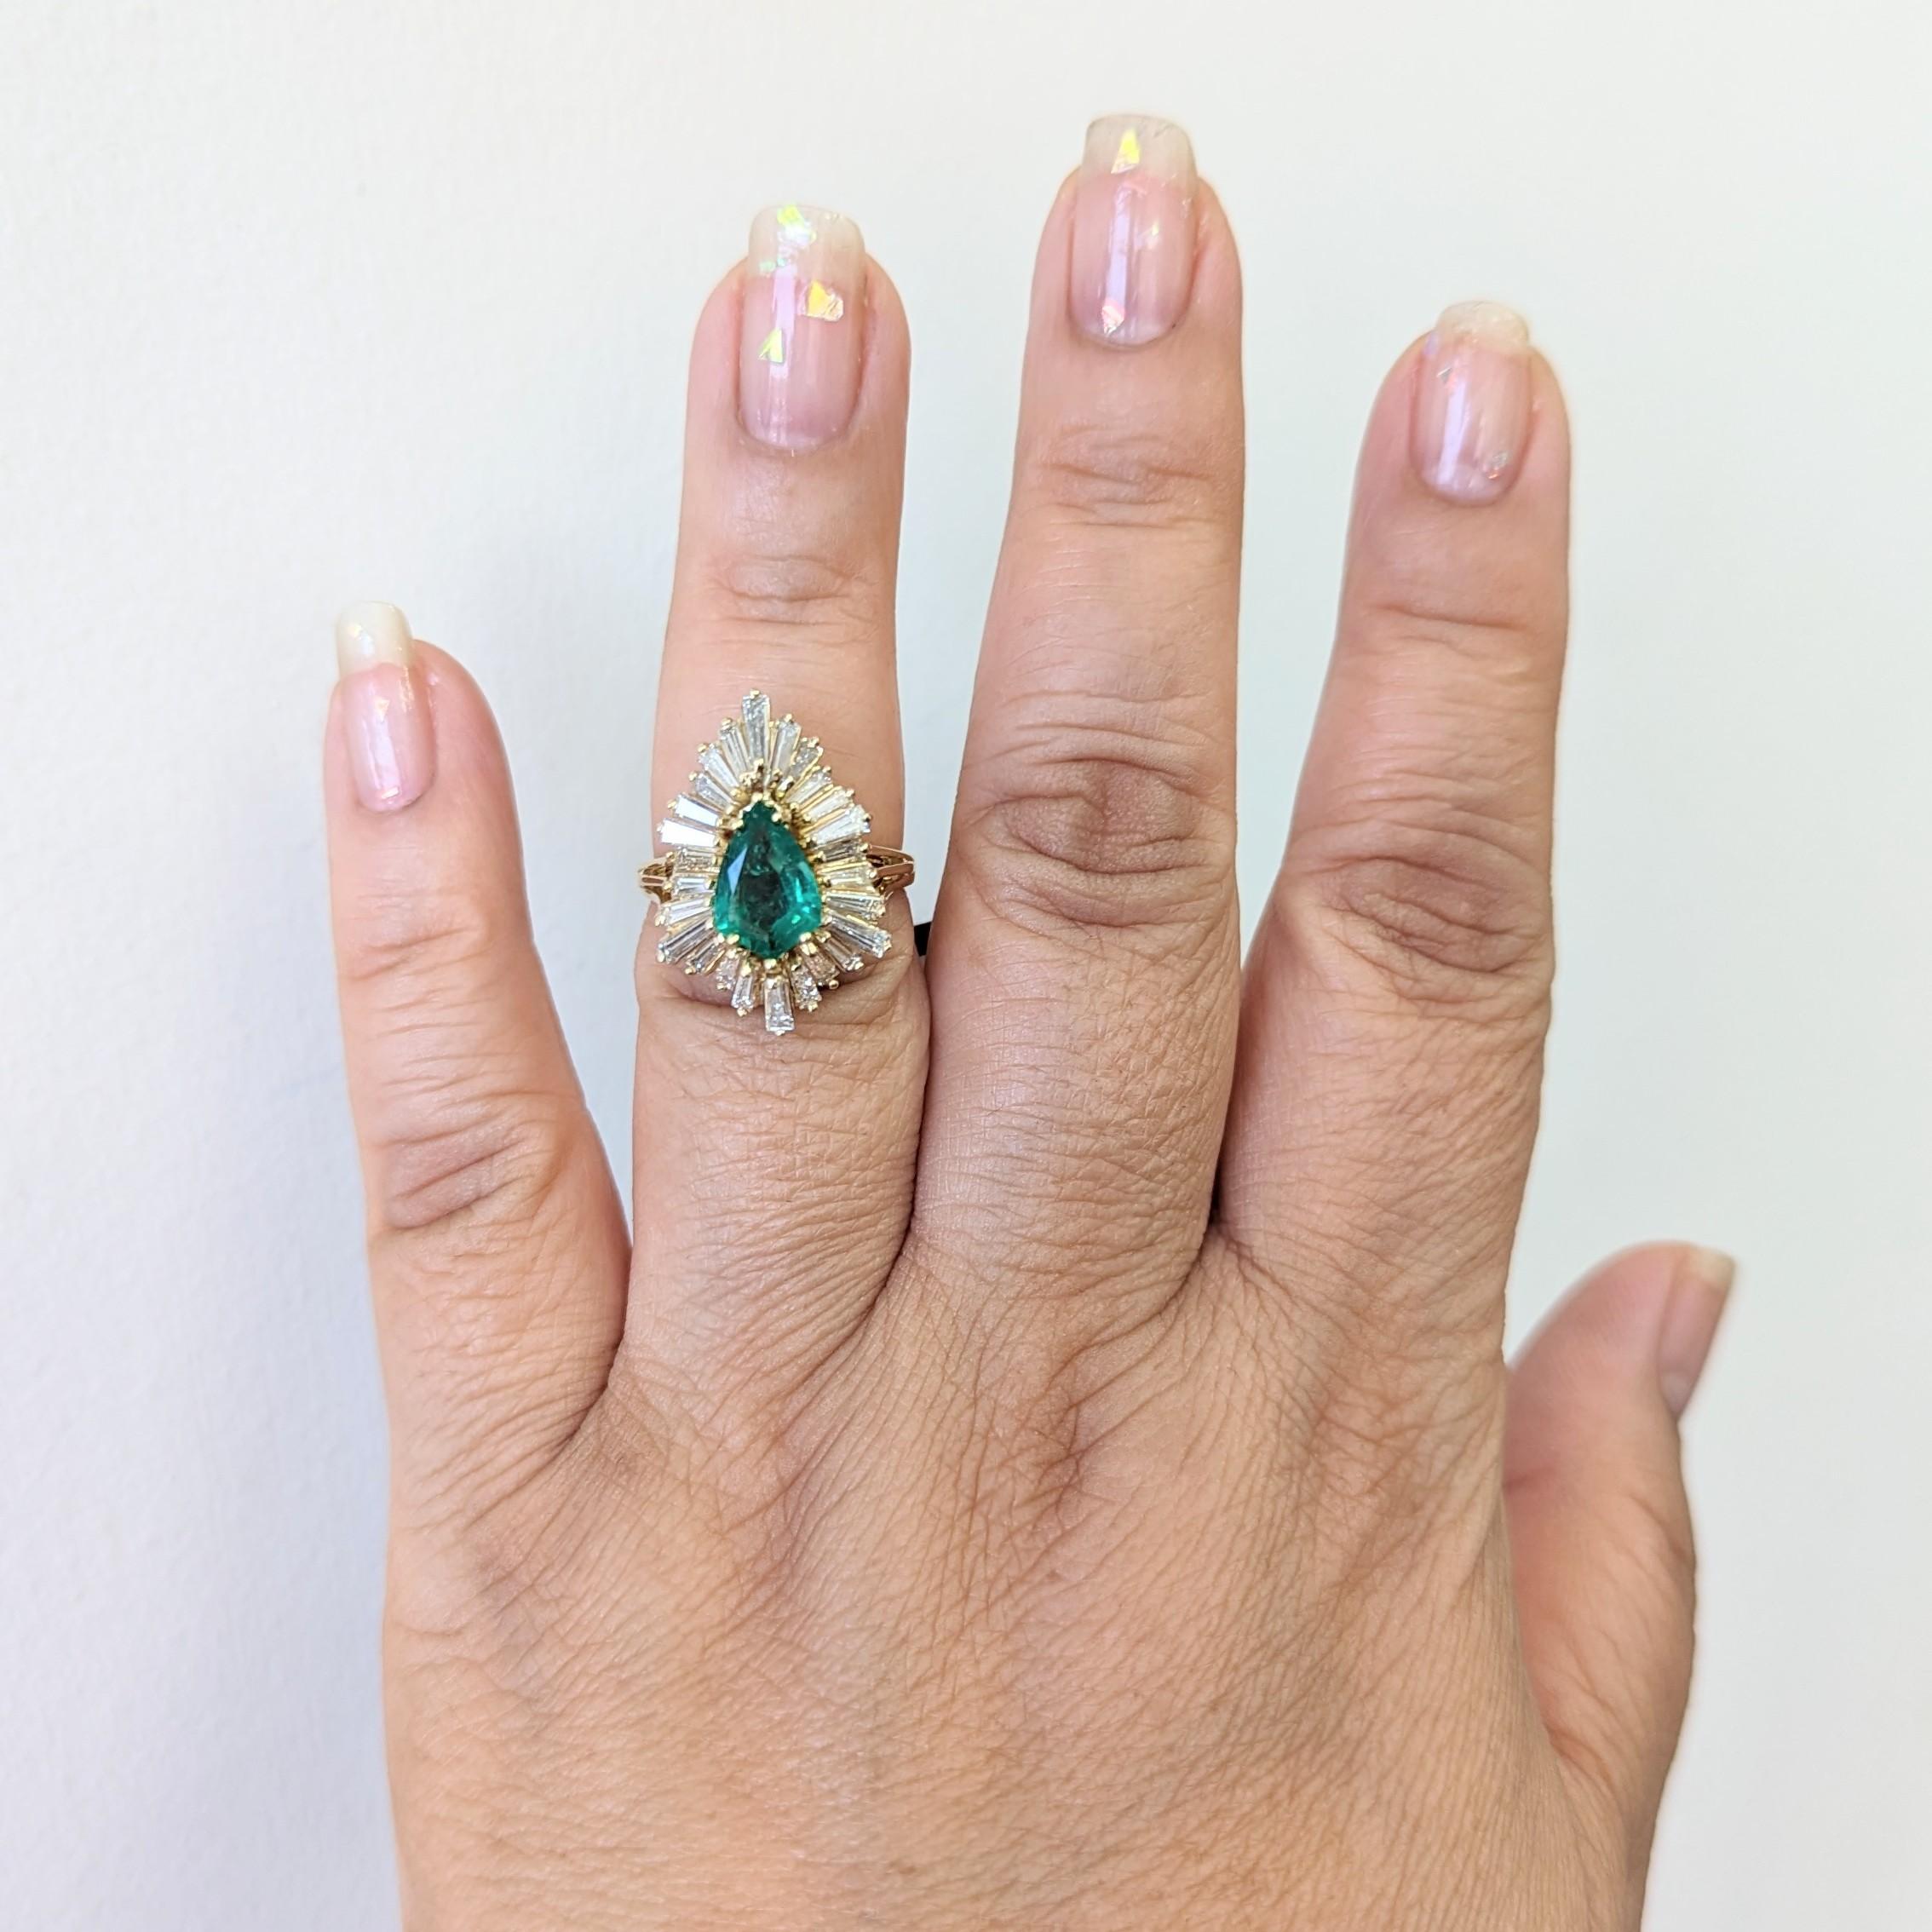 Beautiful 1.38 ct. emerald pear shape with good quality white diamond baguettes.  Handmade in 18k yellow gold.  Ring size 5.